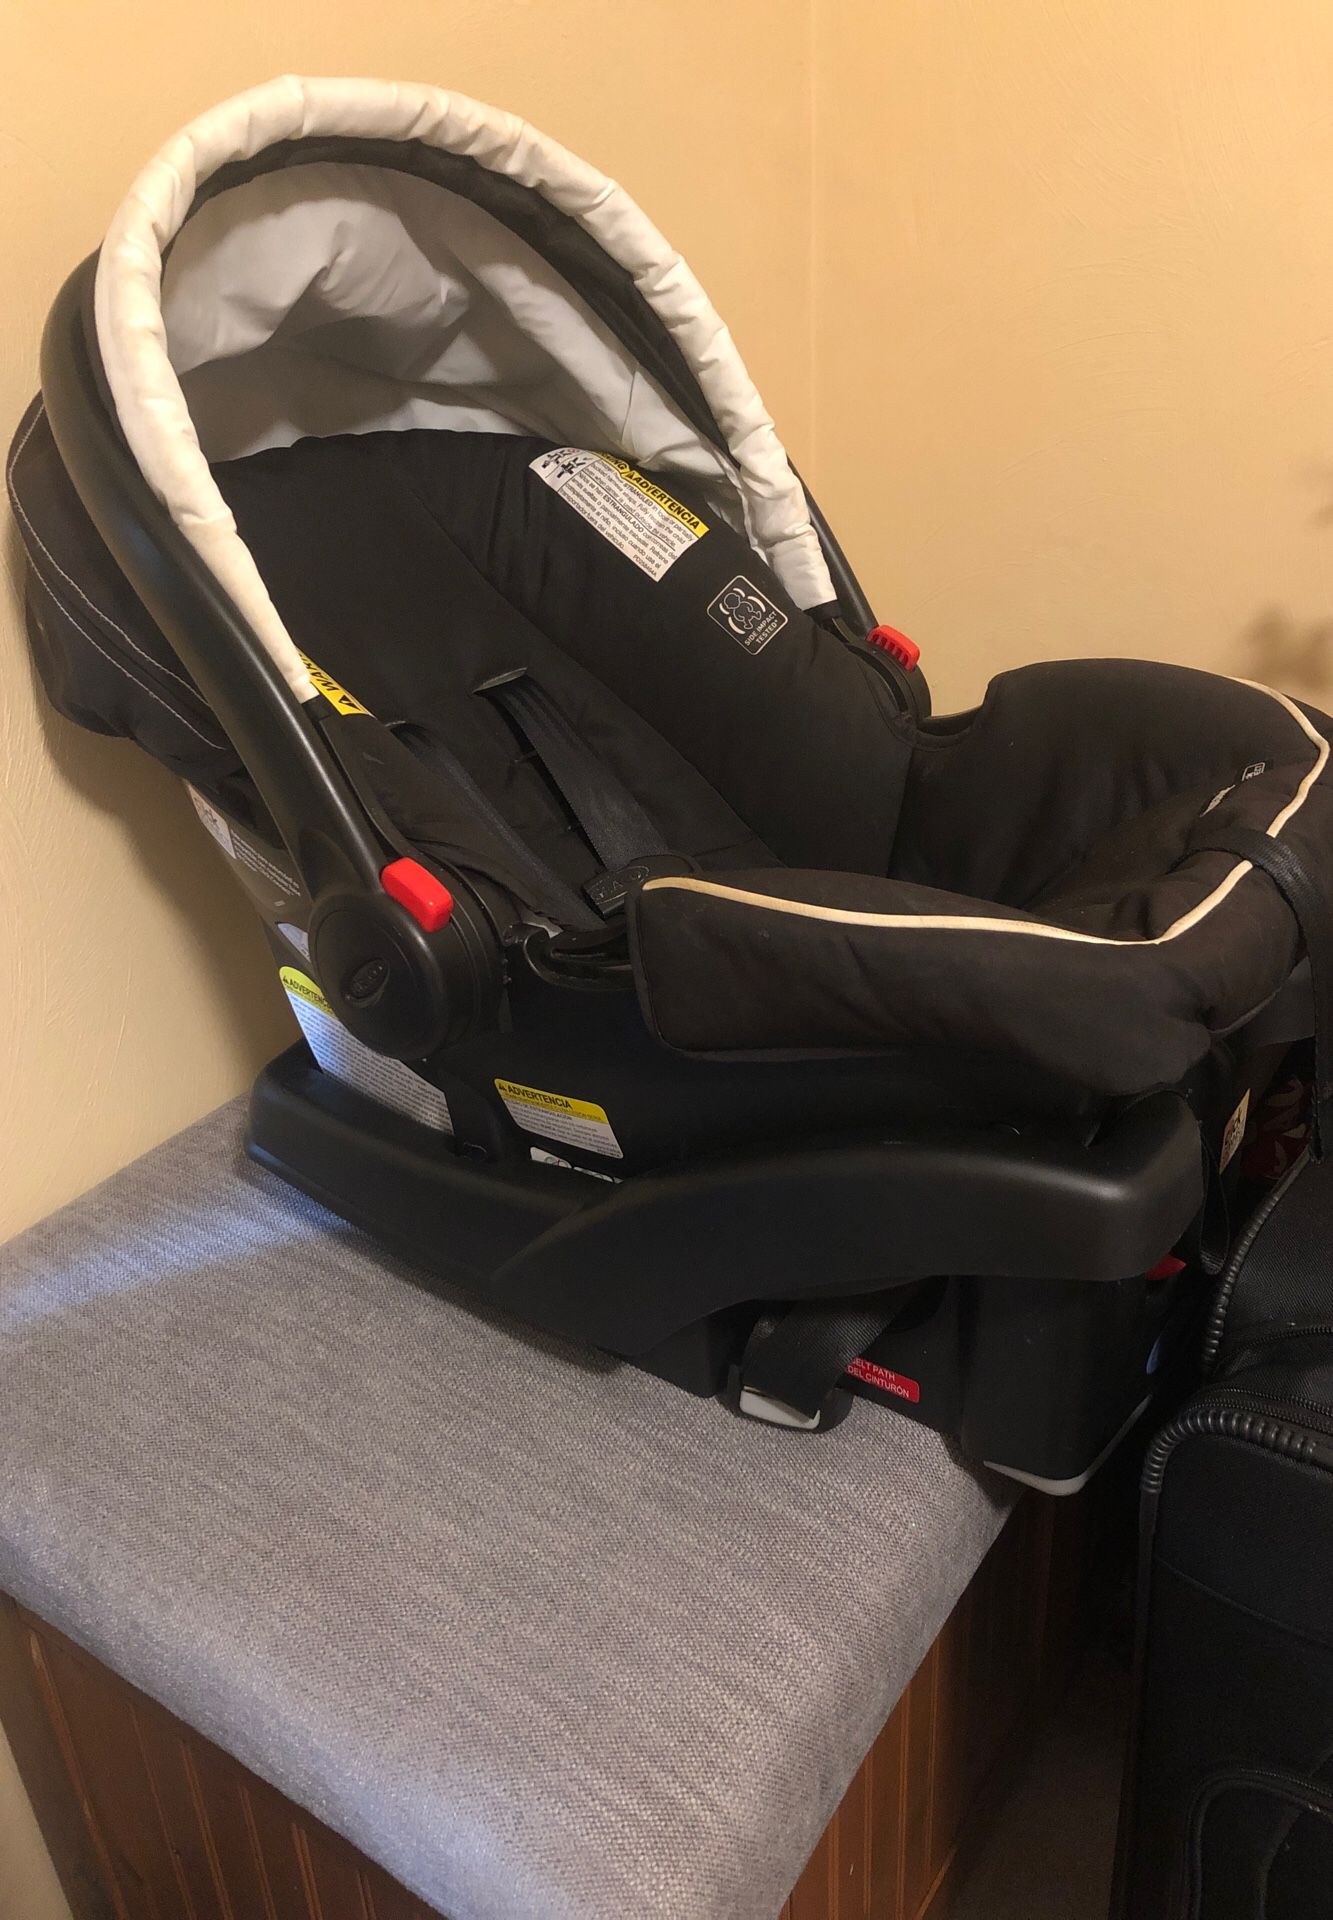 Graco click connect infant car seat x2 bases!